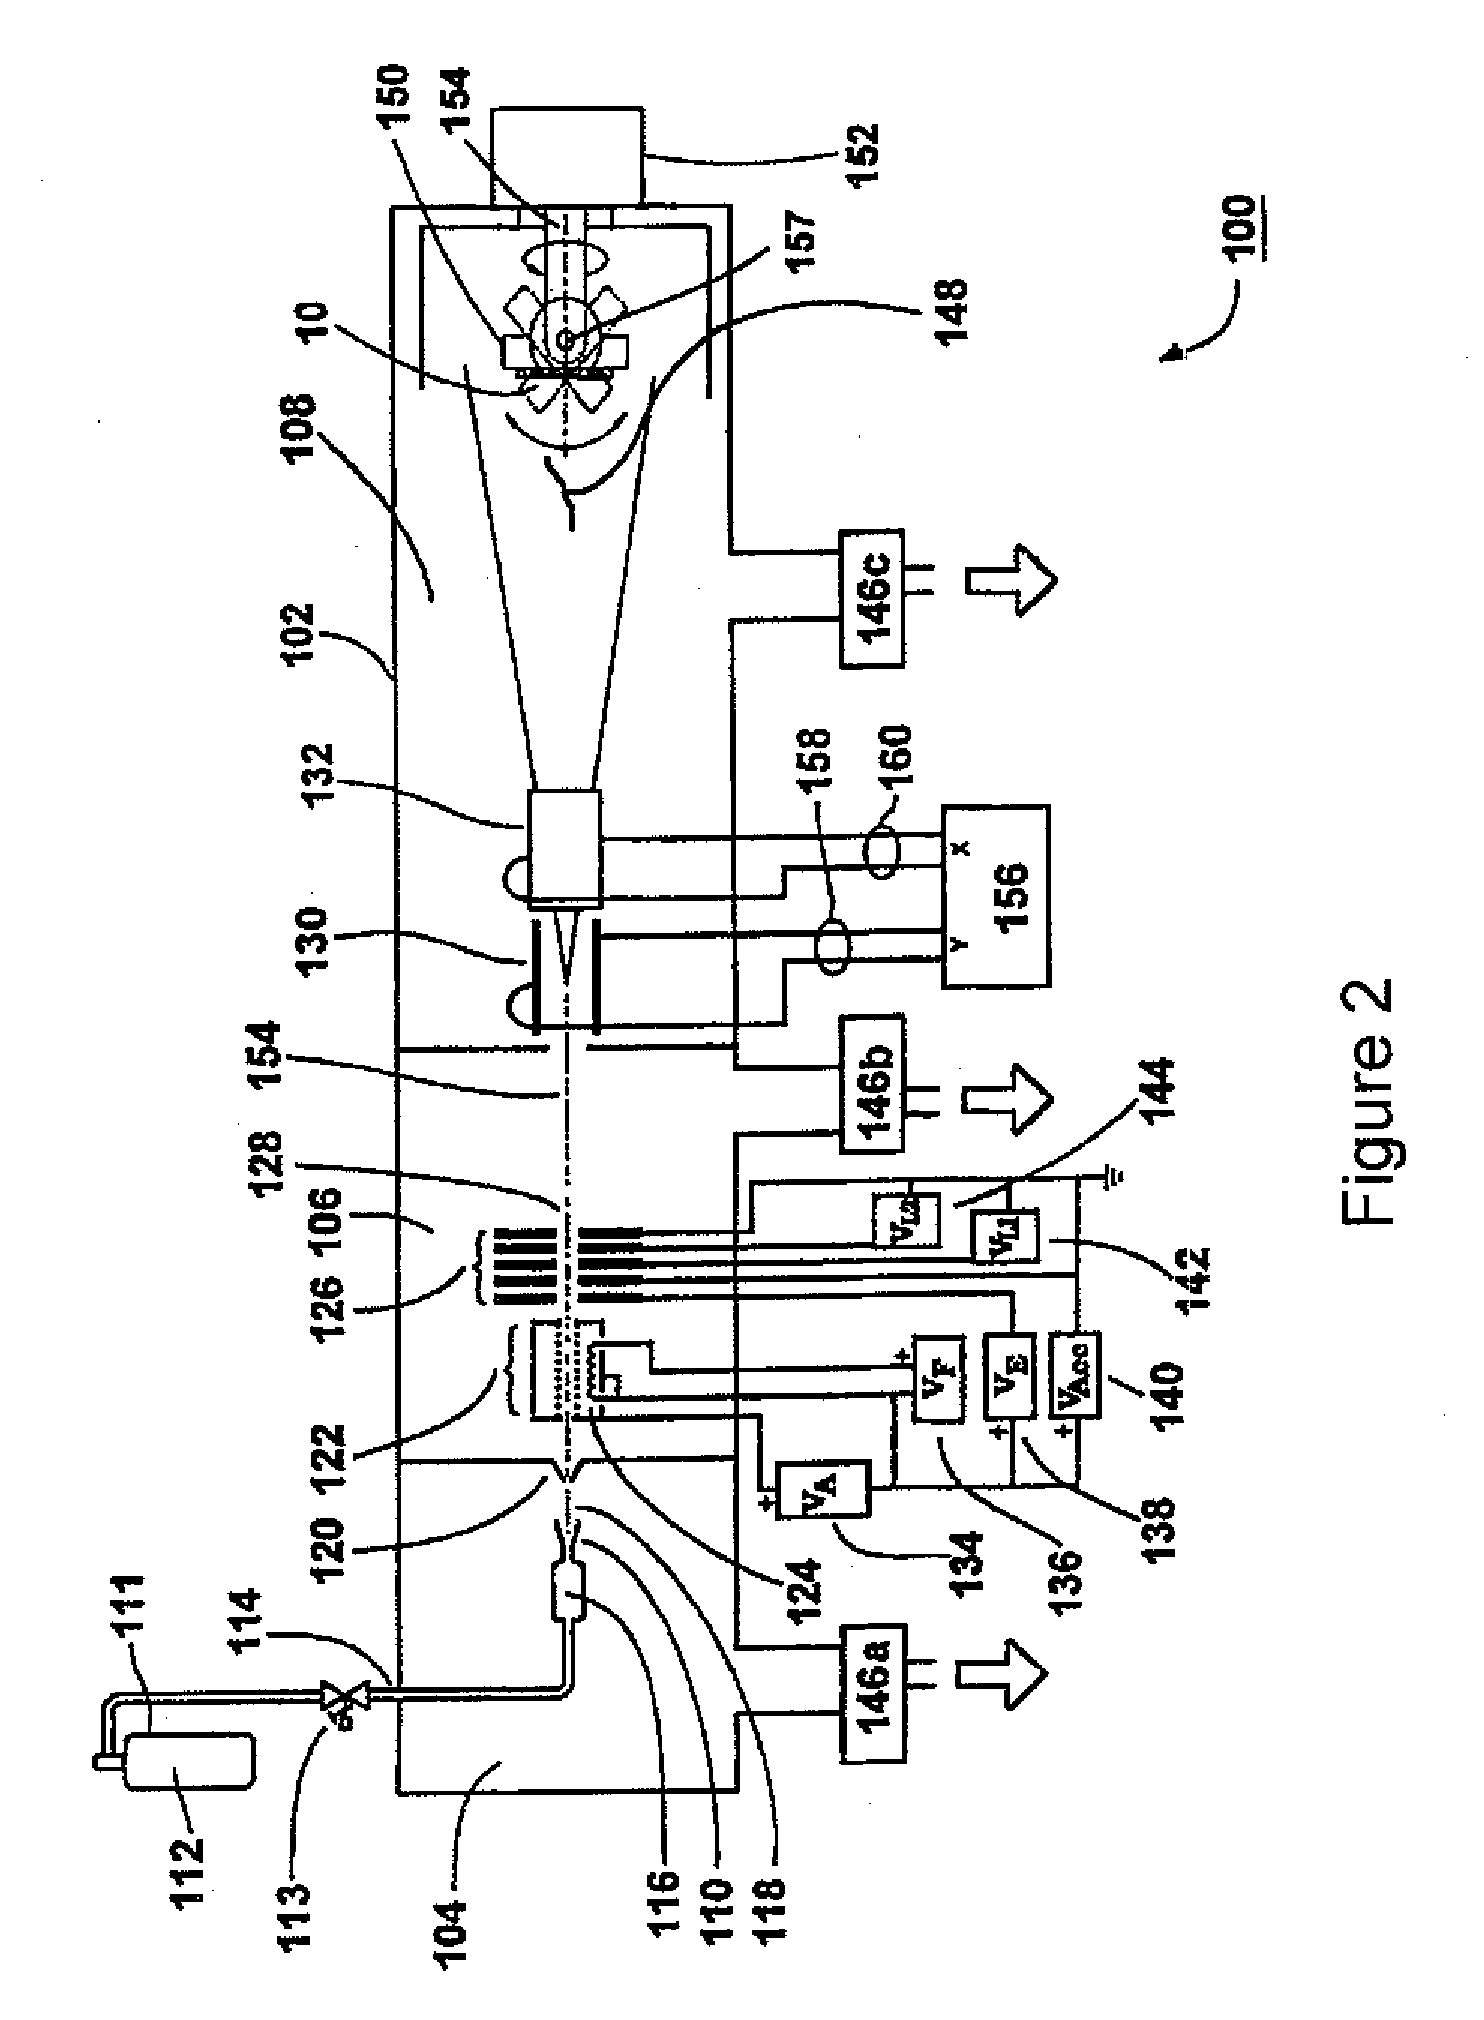 Method and System for Improving Surgical Blades by the Application of Gas Cluster Ion Beam Technology and Improved Surgical Blades